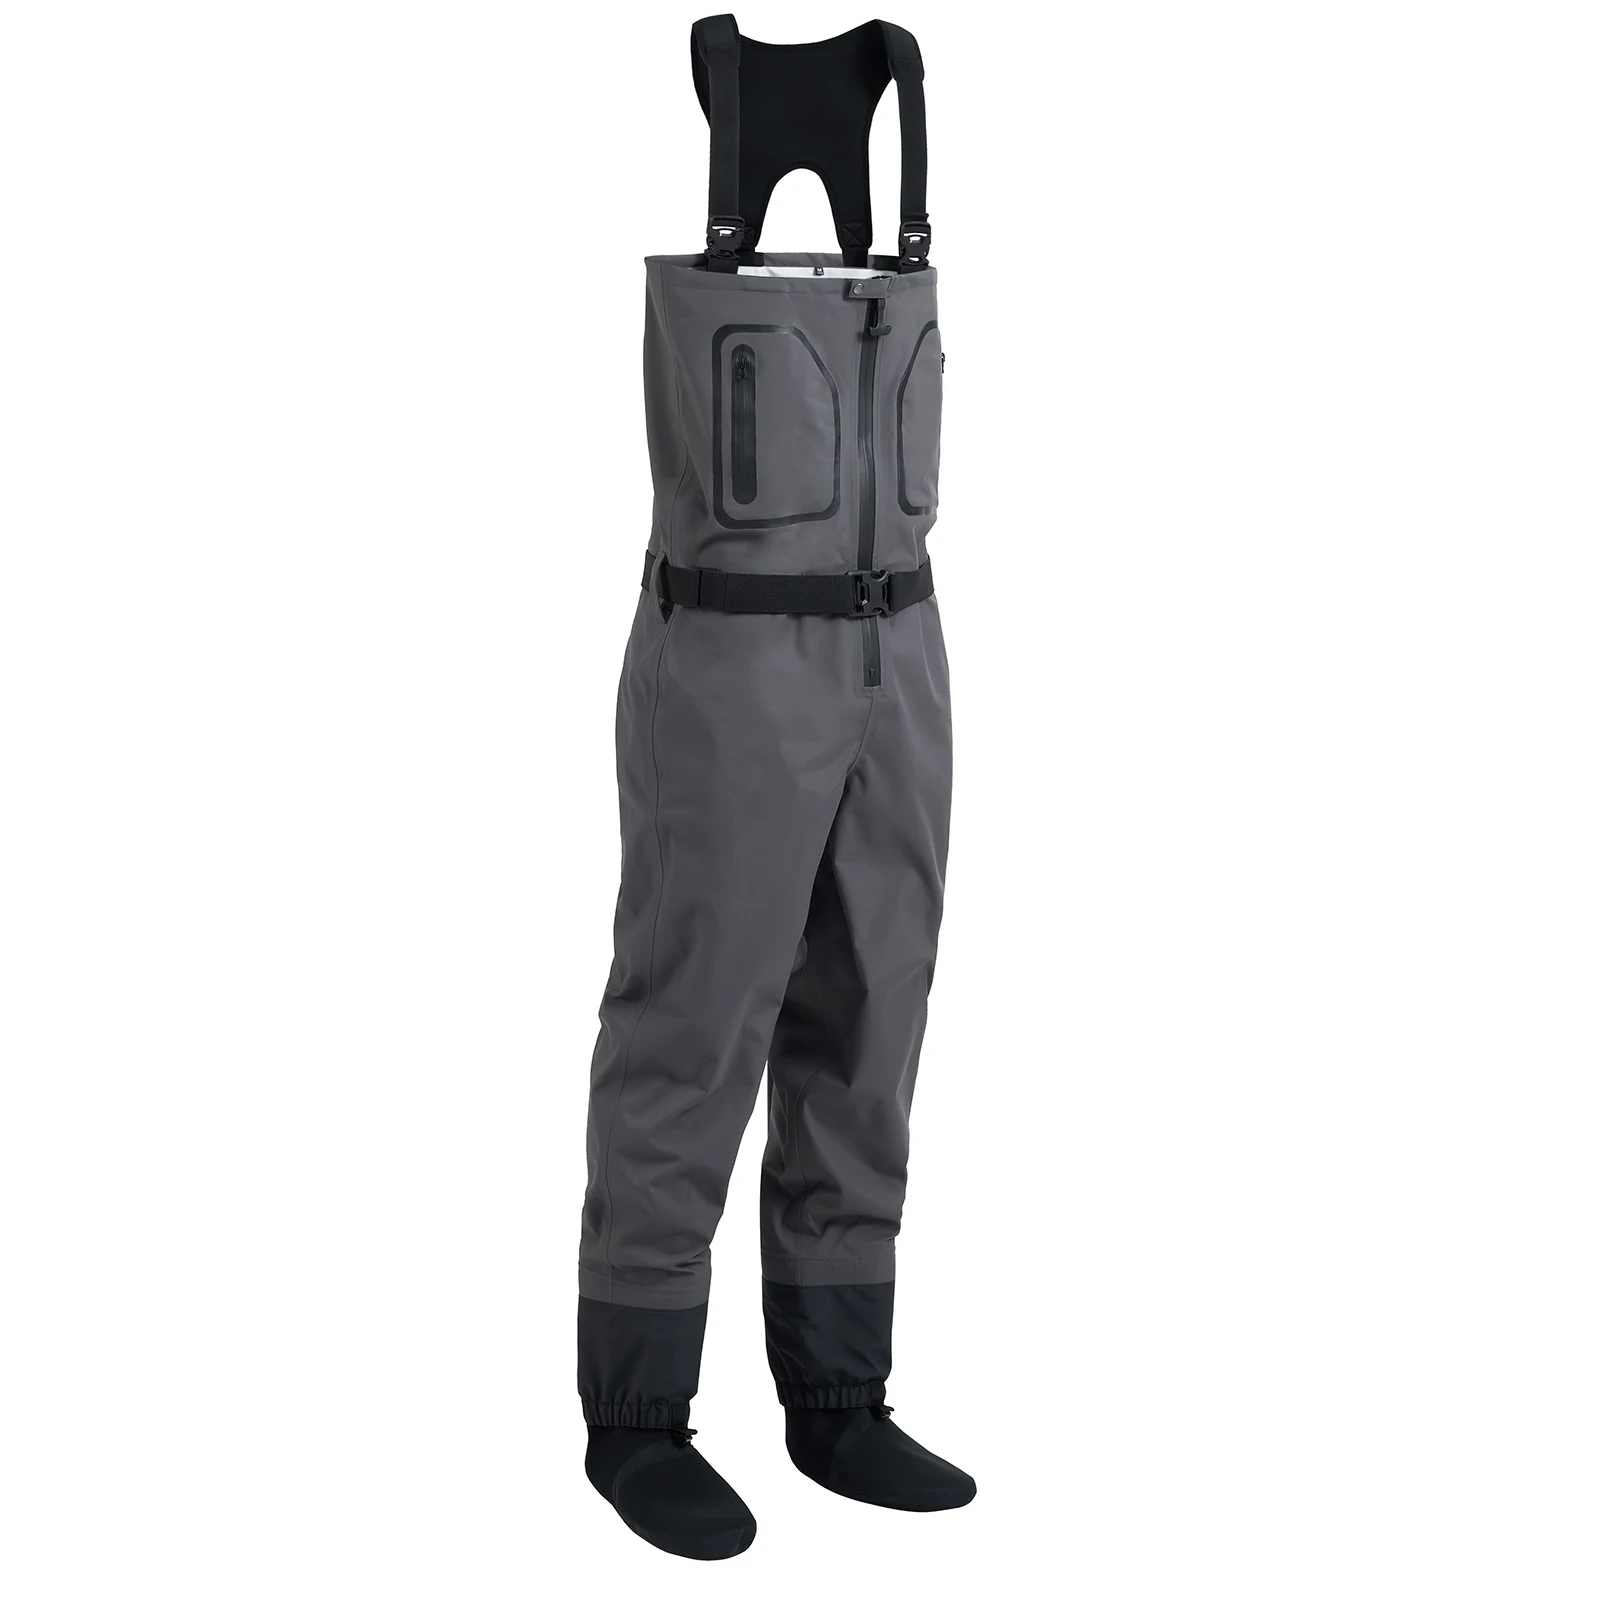 Men's Fly Fishing Chest High Quality Waders Waterproof Breathable One-piece  Clothing Pants With Neoprene Socks For Enjoy WM2